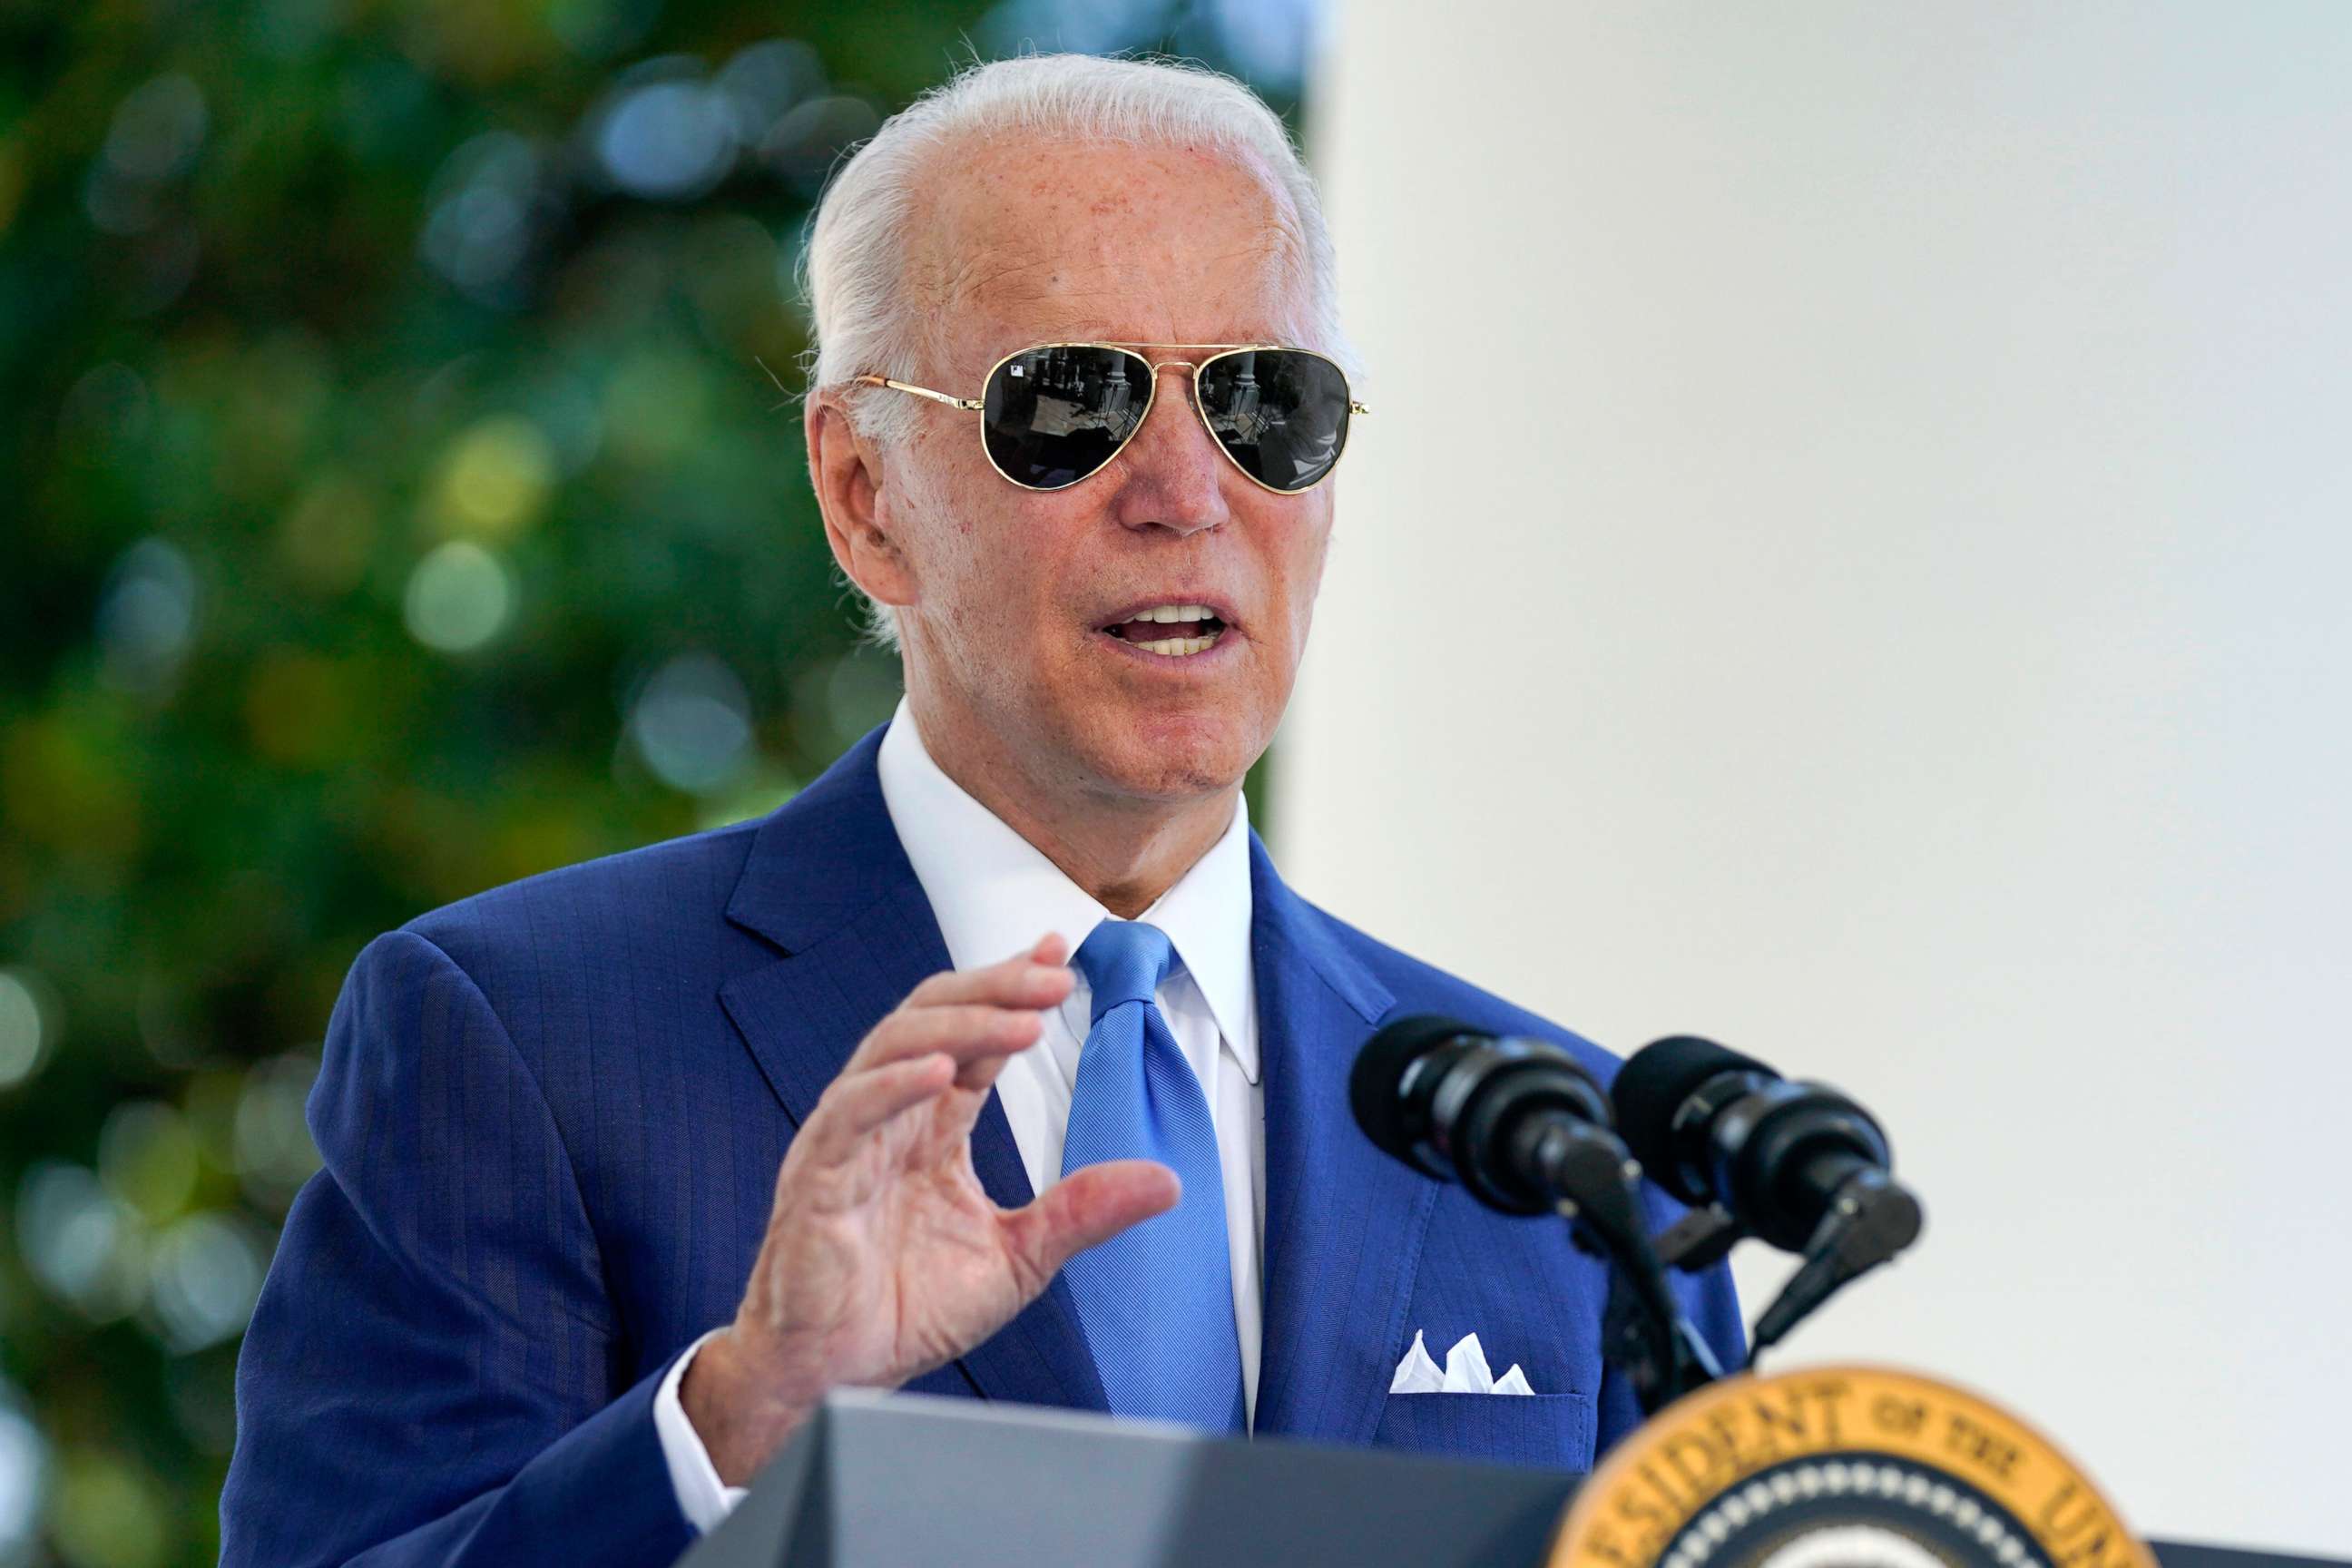 PHOTO: President Joe Biden speaks before signing two bills aimed at combating fraud in the COVID-19 small business relief programs, Aug. 5, 2022, at the White House in Washington.